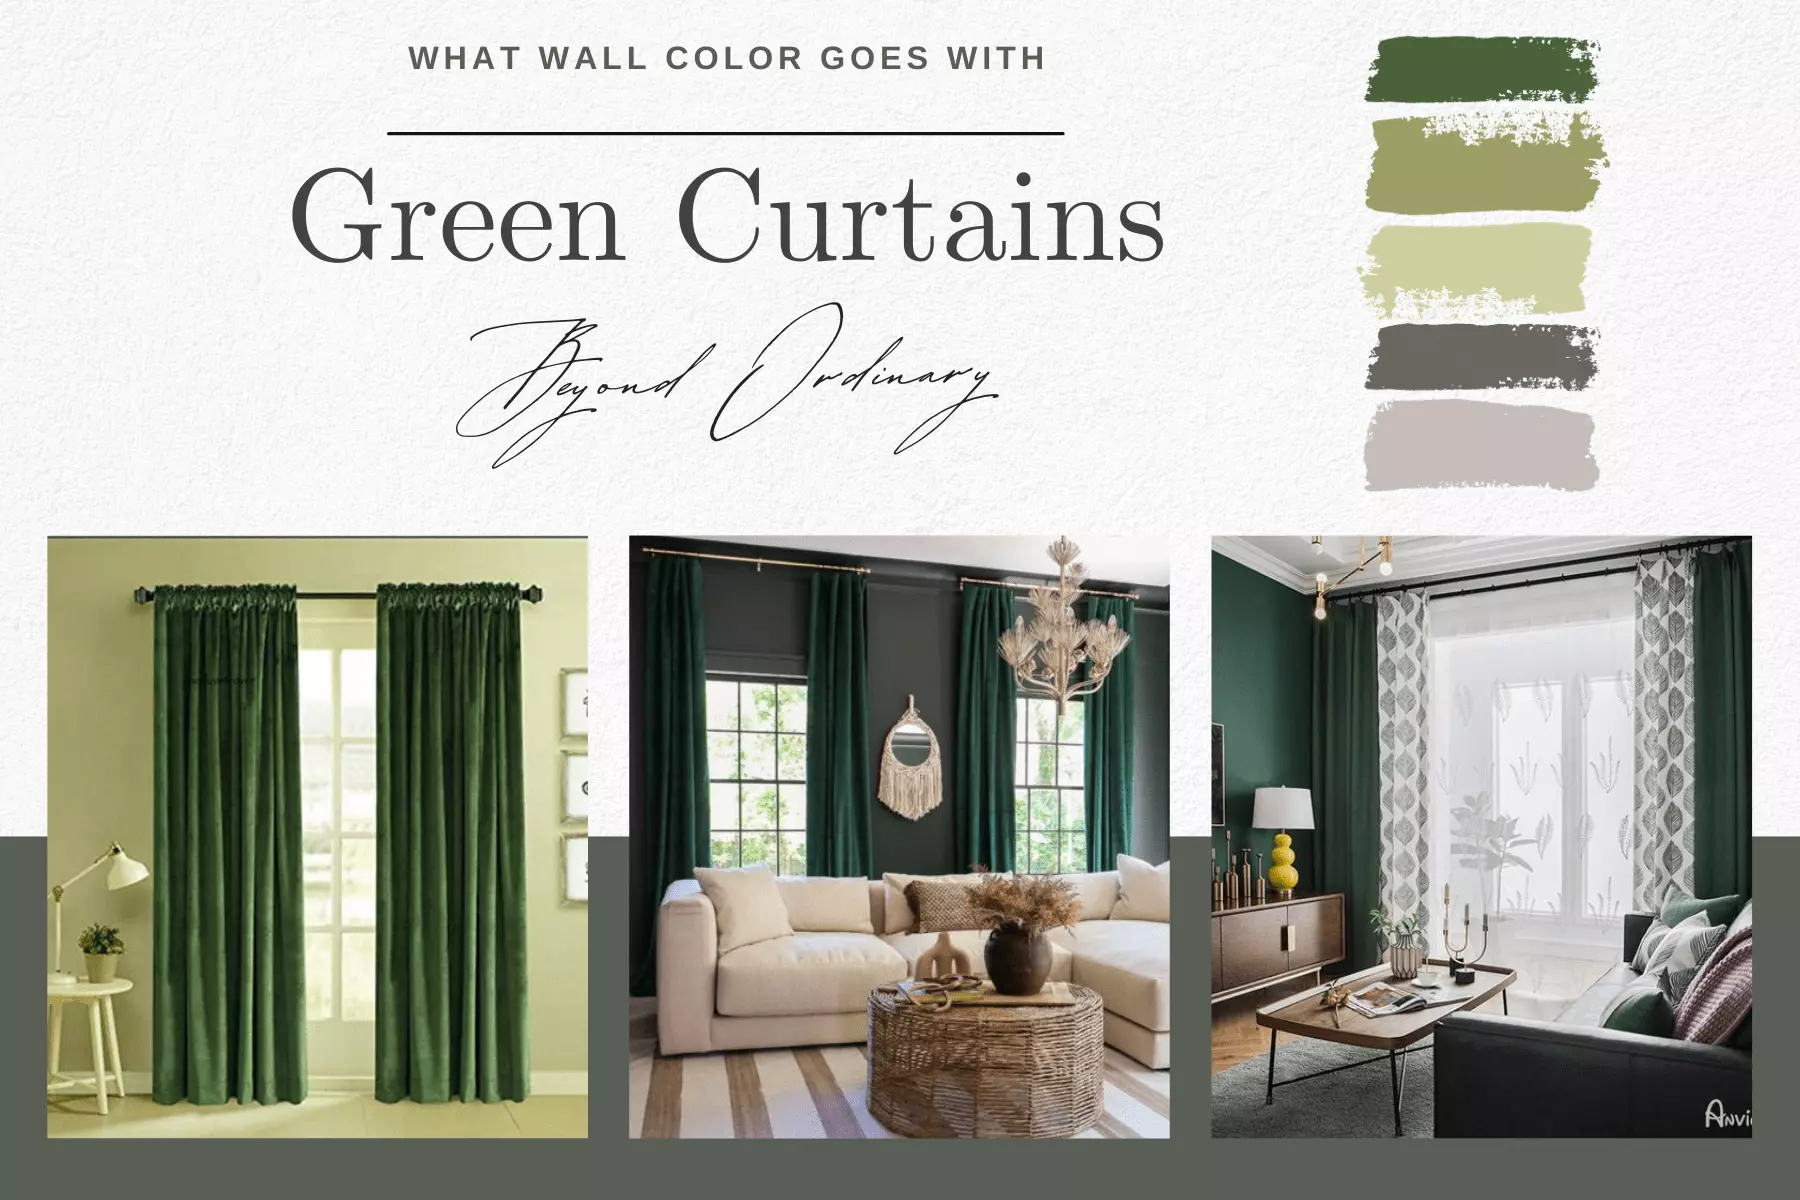 What wall color goes with green curtains